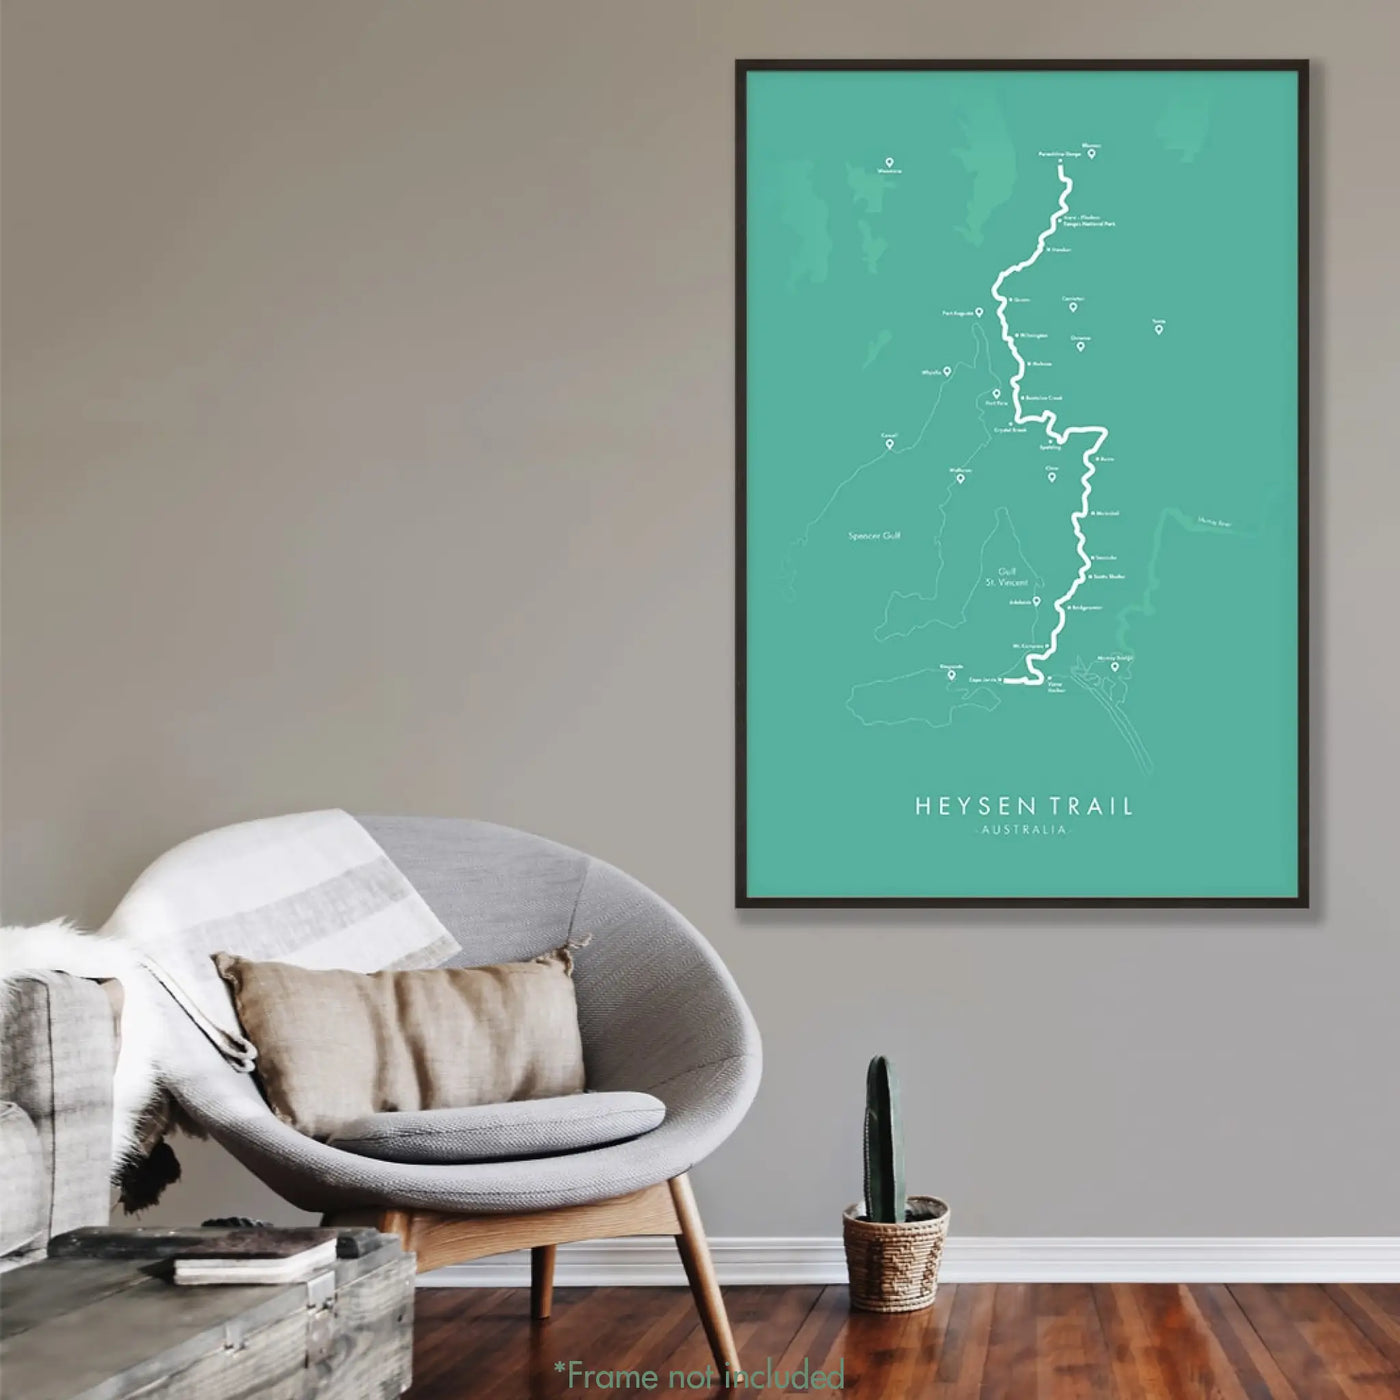 Trail Poster of Heysen Trail - Teal Mockup